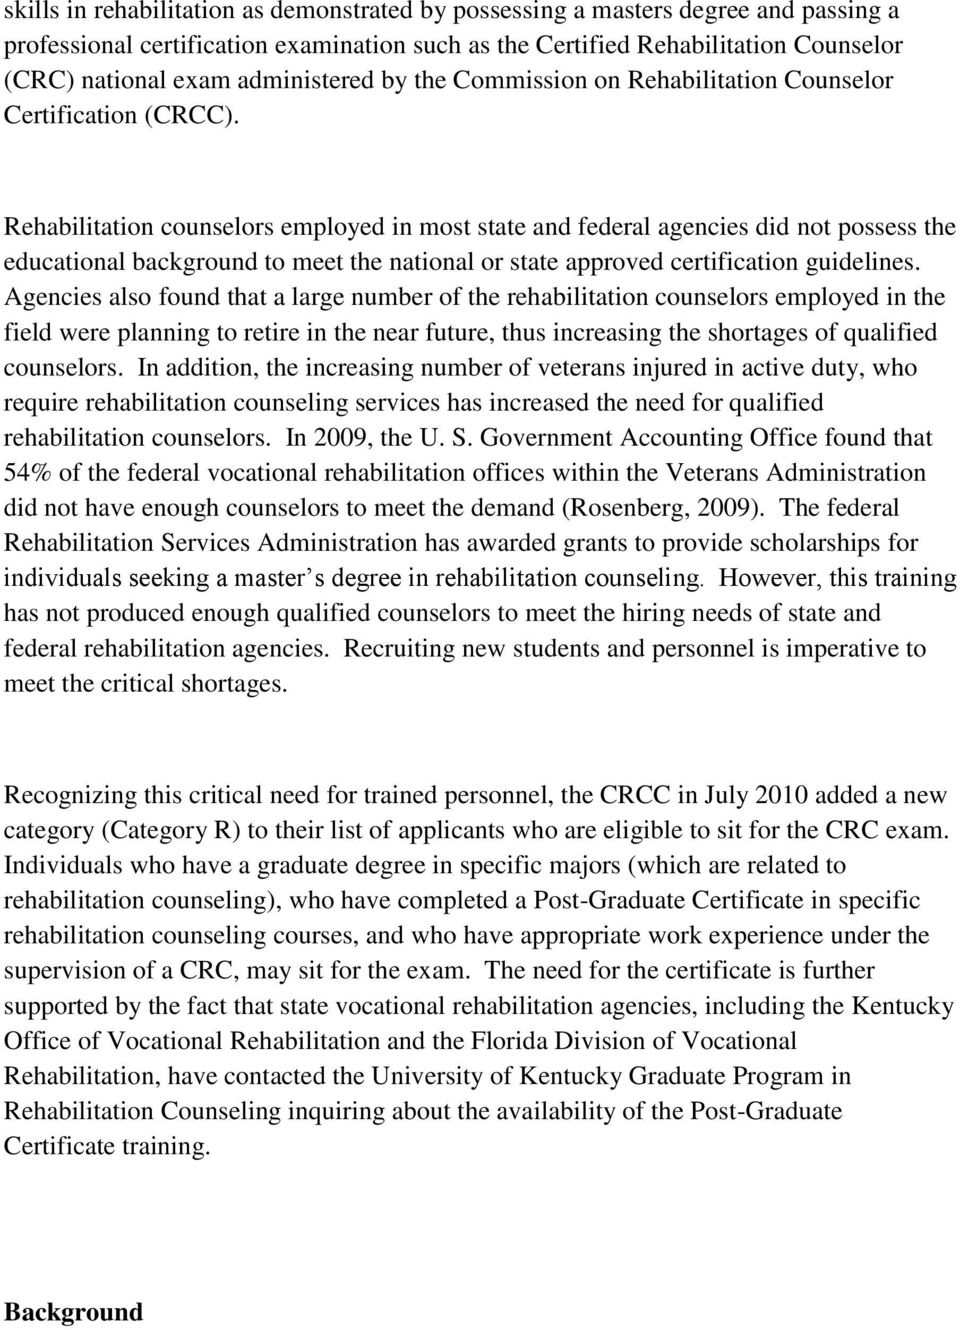 Rehabilitation counselors employed in most state and federal agencies did not possess the educational background to meet the national or state approved certification guidelines.